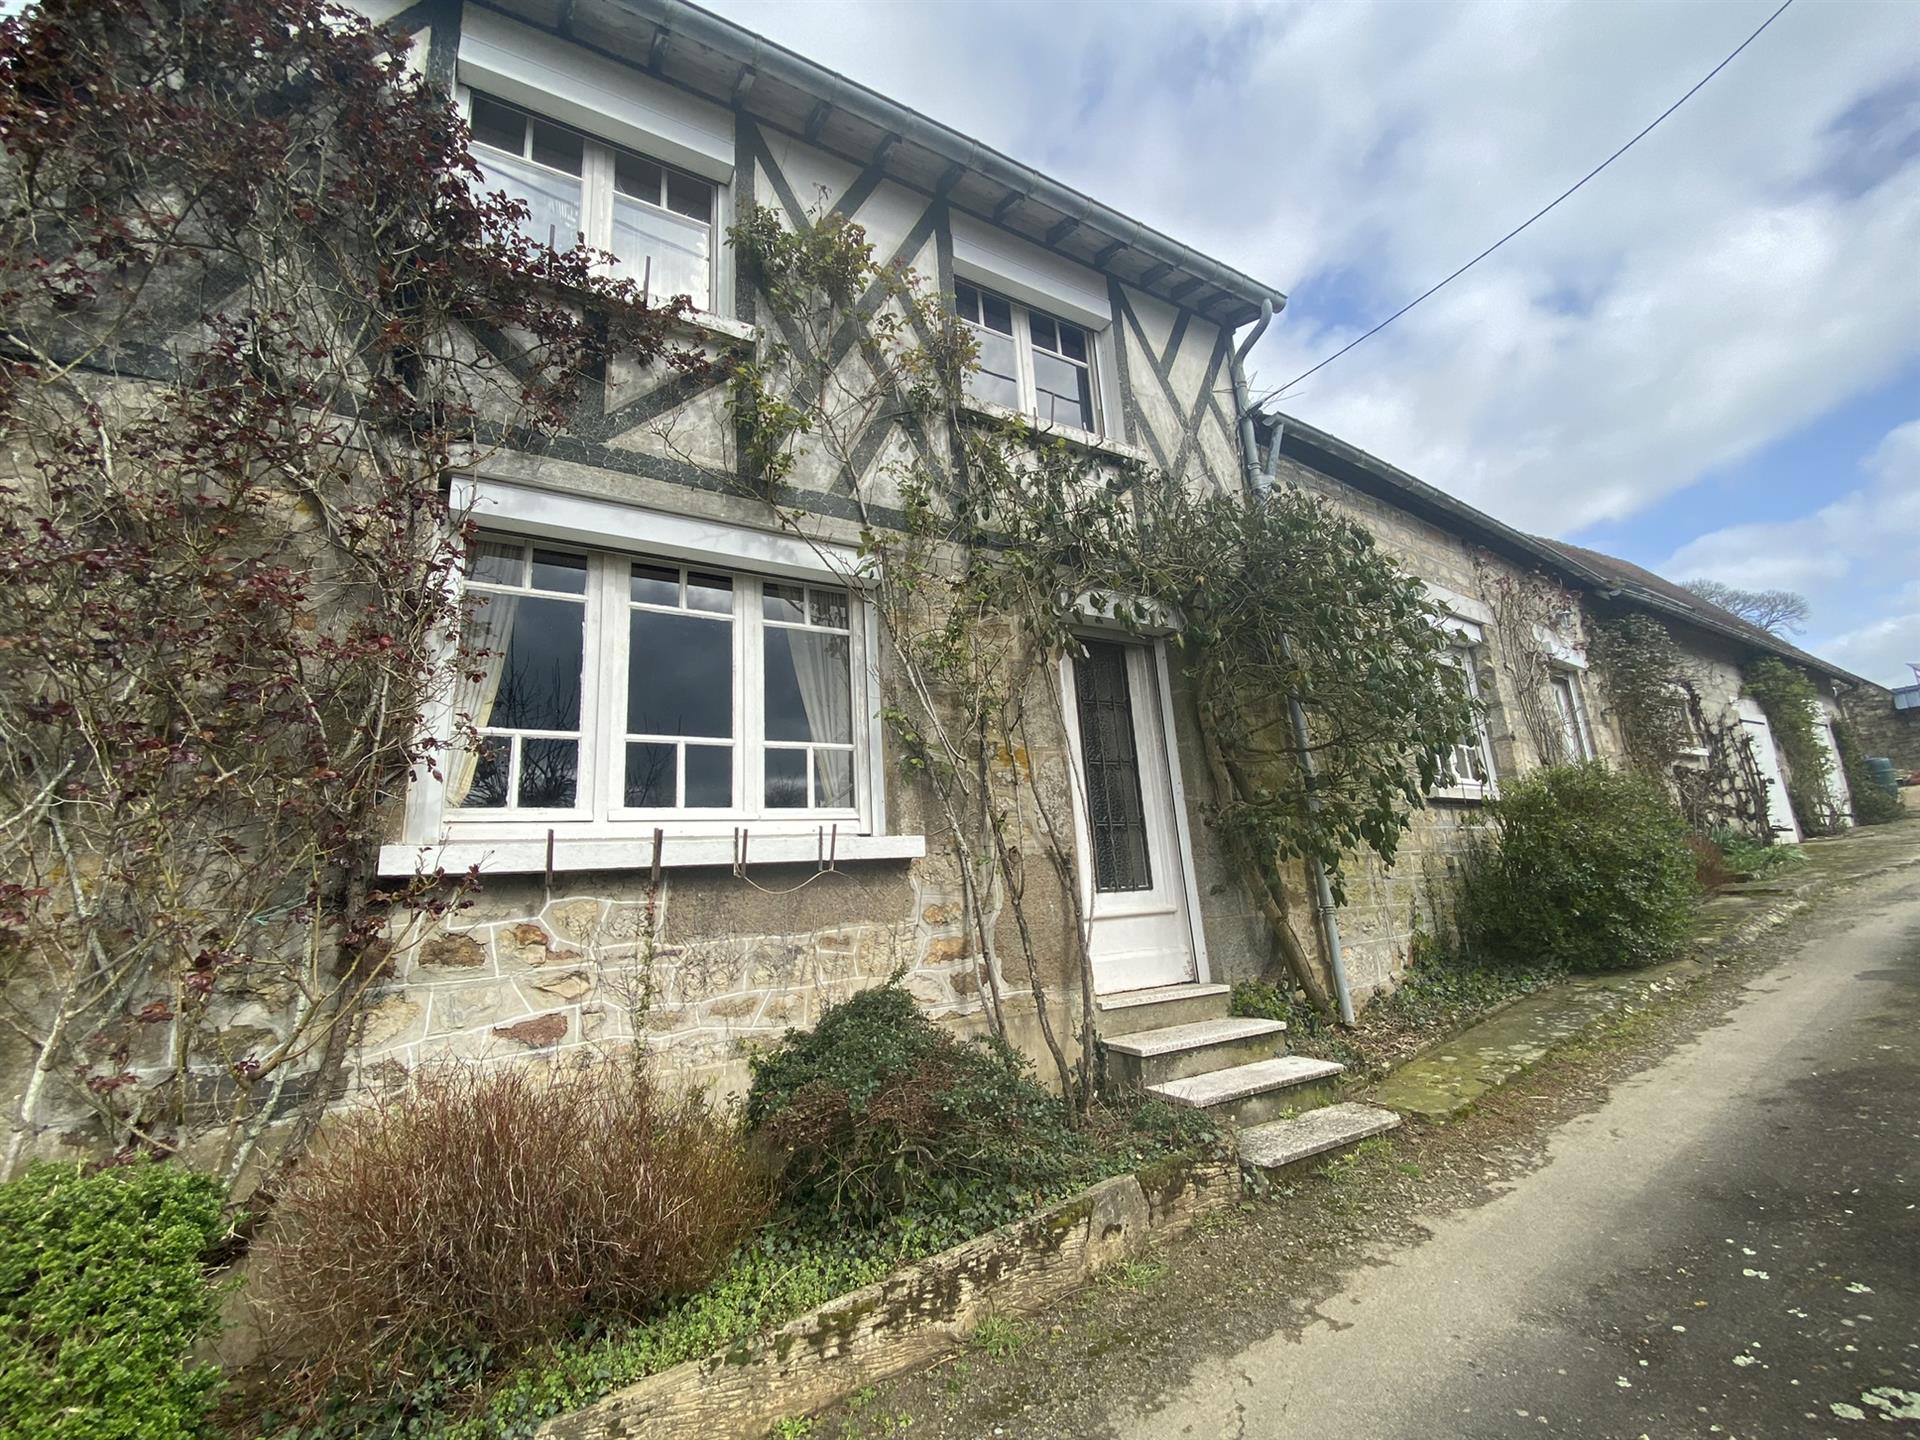 House located in Juvigny-Val-D'Andaine (Orne) (61140), of approximately 96 m² of living space 